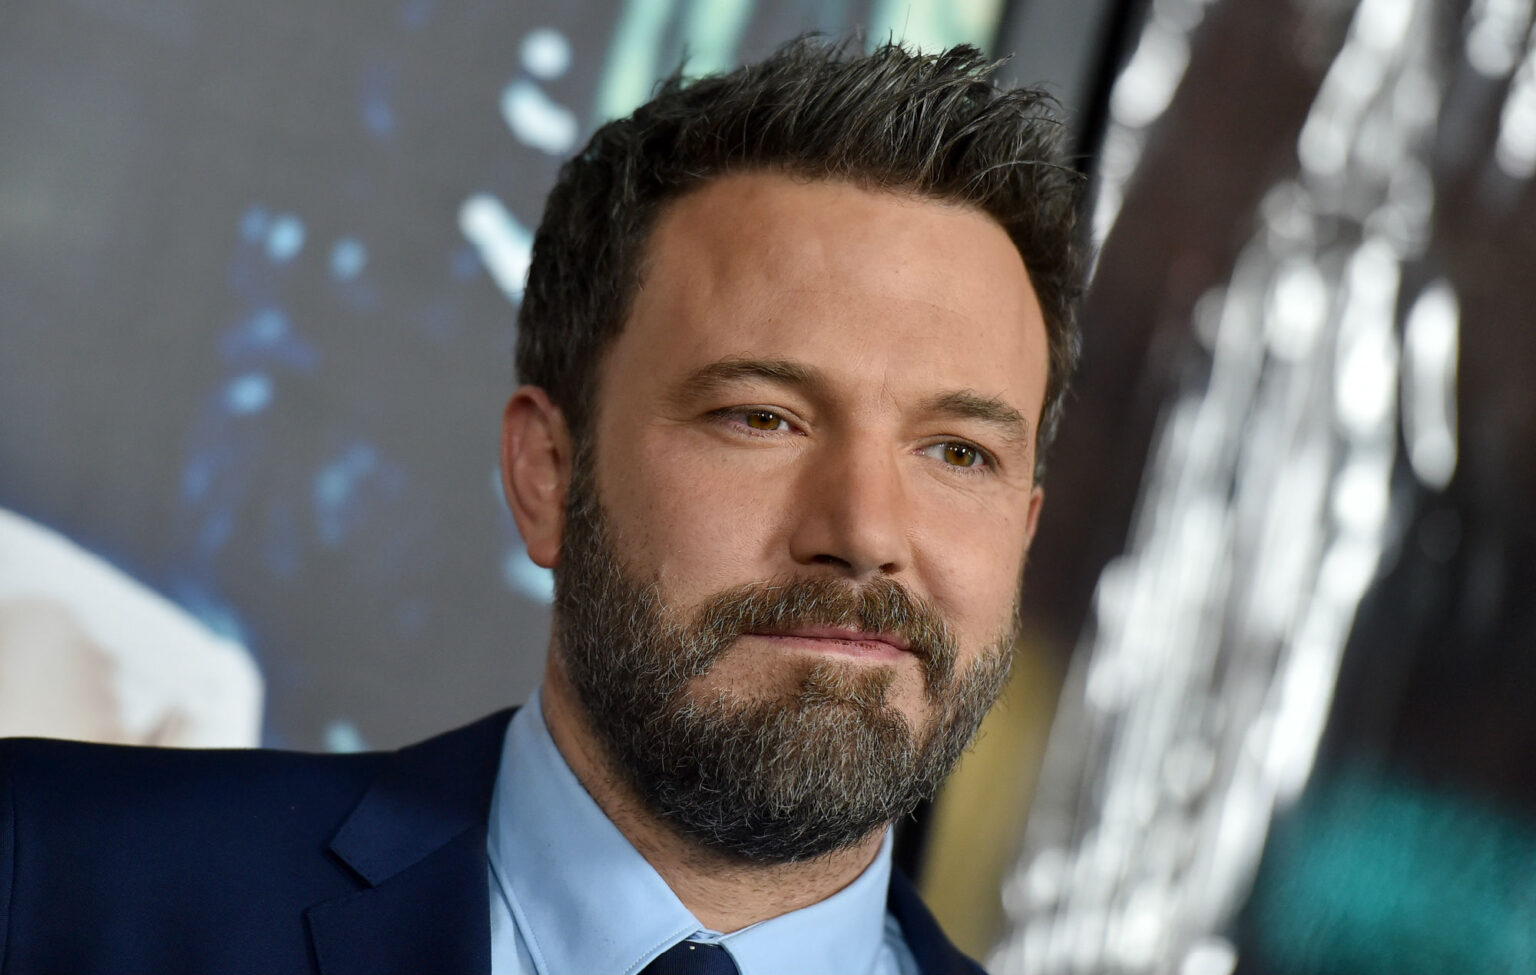 Ben Affleck doesn't have a girlfriend and maybe now we know why. Swipe right on this hilarious story of online dating among the Hollywood elite!